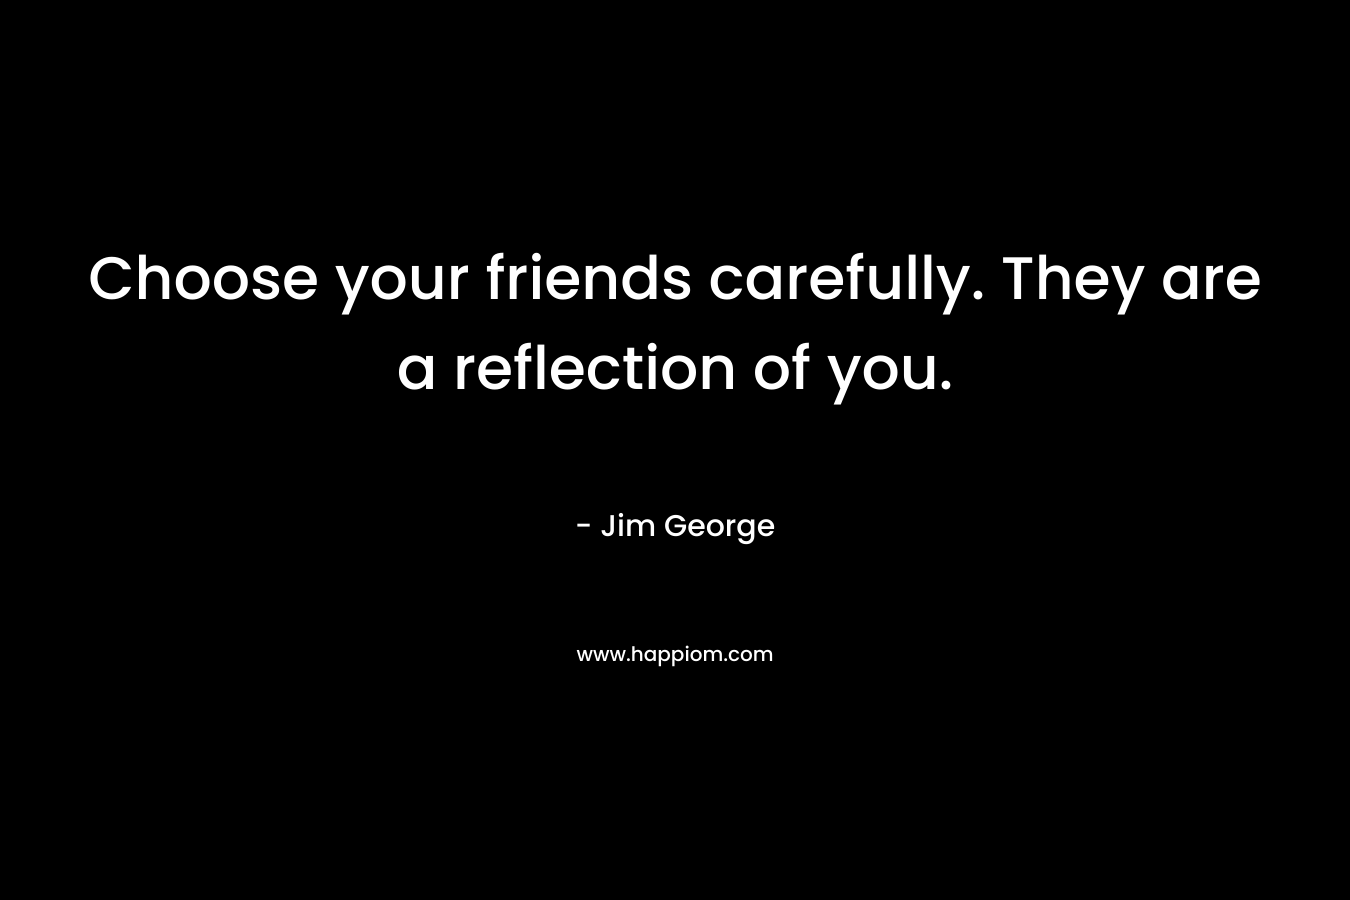 Choose your friends carefully. They are a reflection of you.